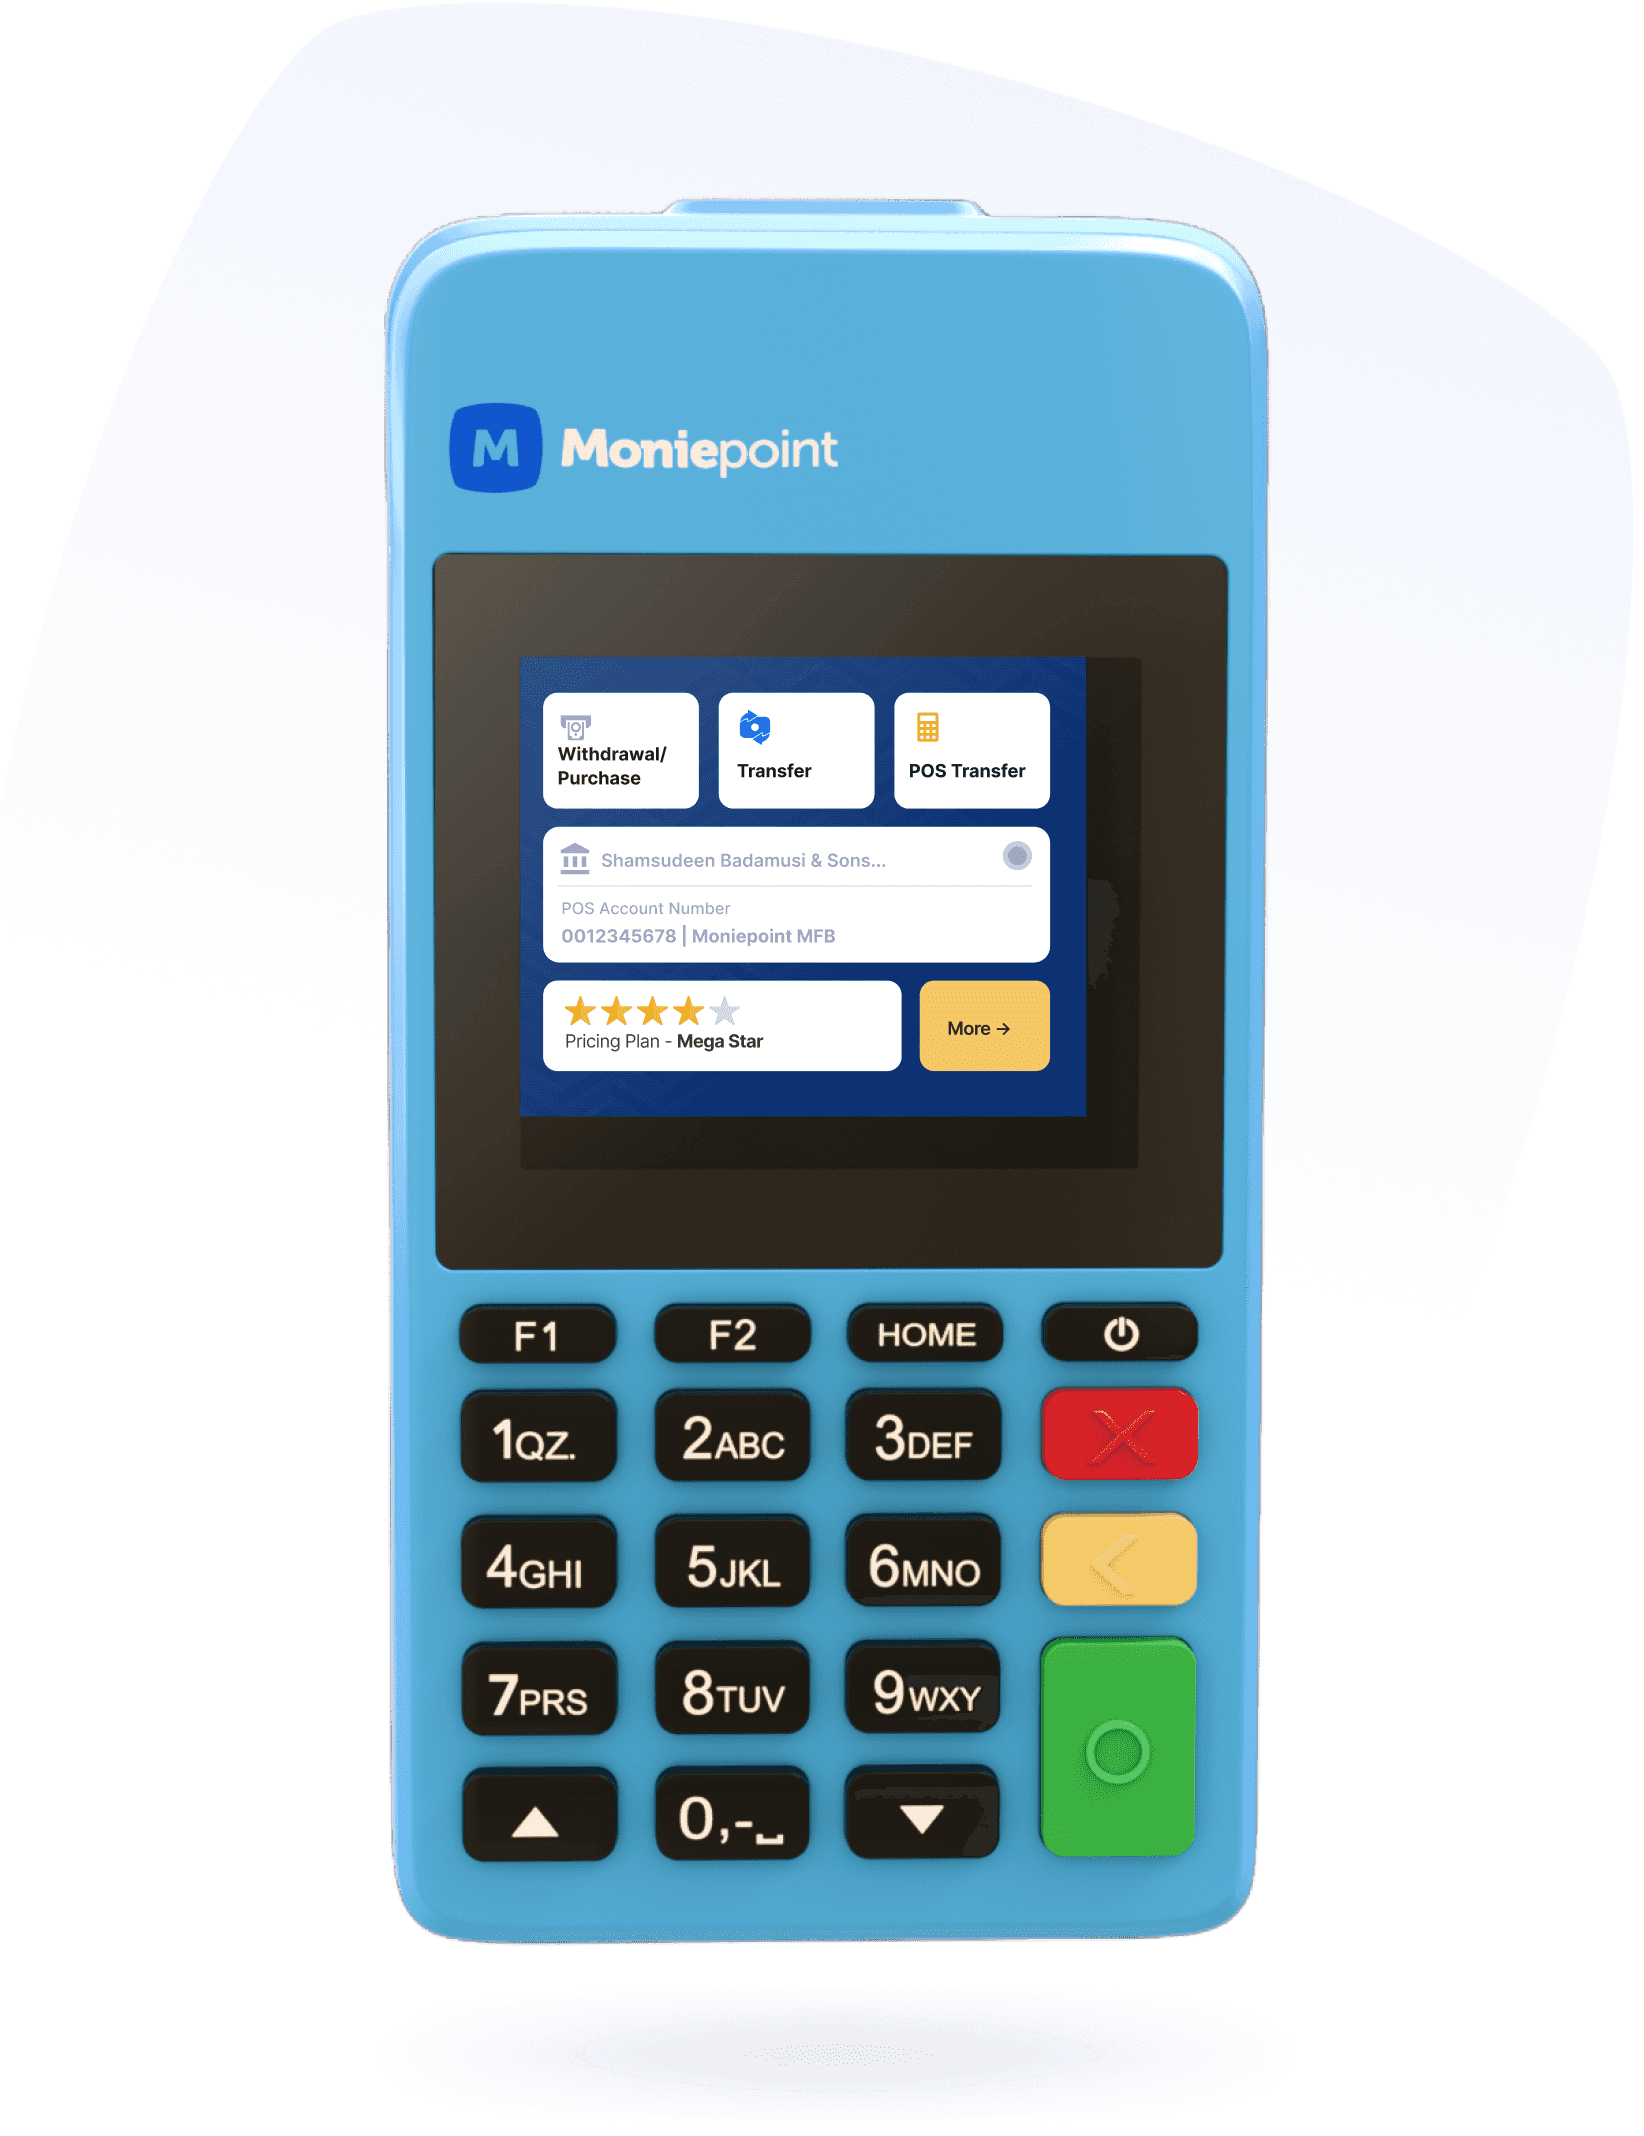 How to Get Moniepoint POS Charges, Commission, and Application Process